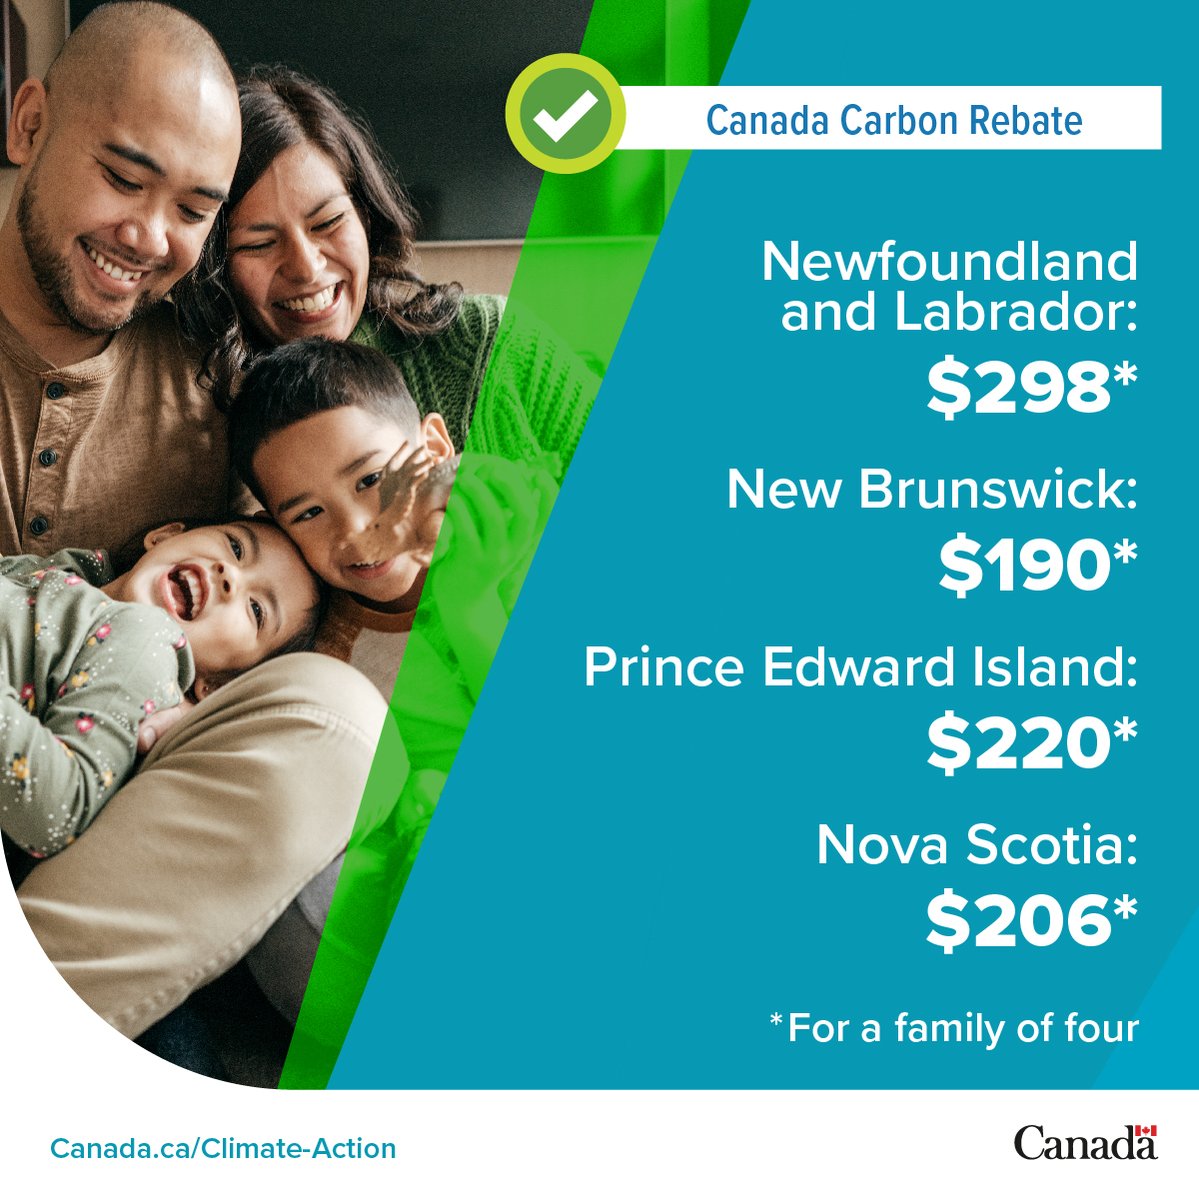 1/2 The #CanadaCarbonRebate (CCR) ensures financial support for Canadians while encouraging climate action. Check out the new CCR estimator to find out how much you could receive: ow.ly/3bhS50ResEV  
#NewFoundlandAndLabrador #NewBrunswick #PrinceEdouardIsland #NovaScotia